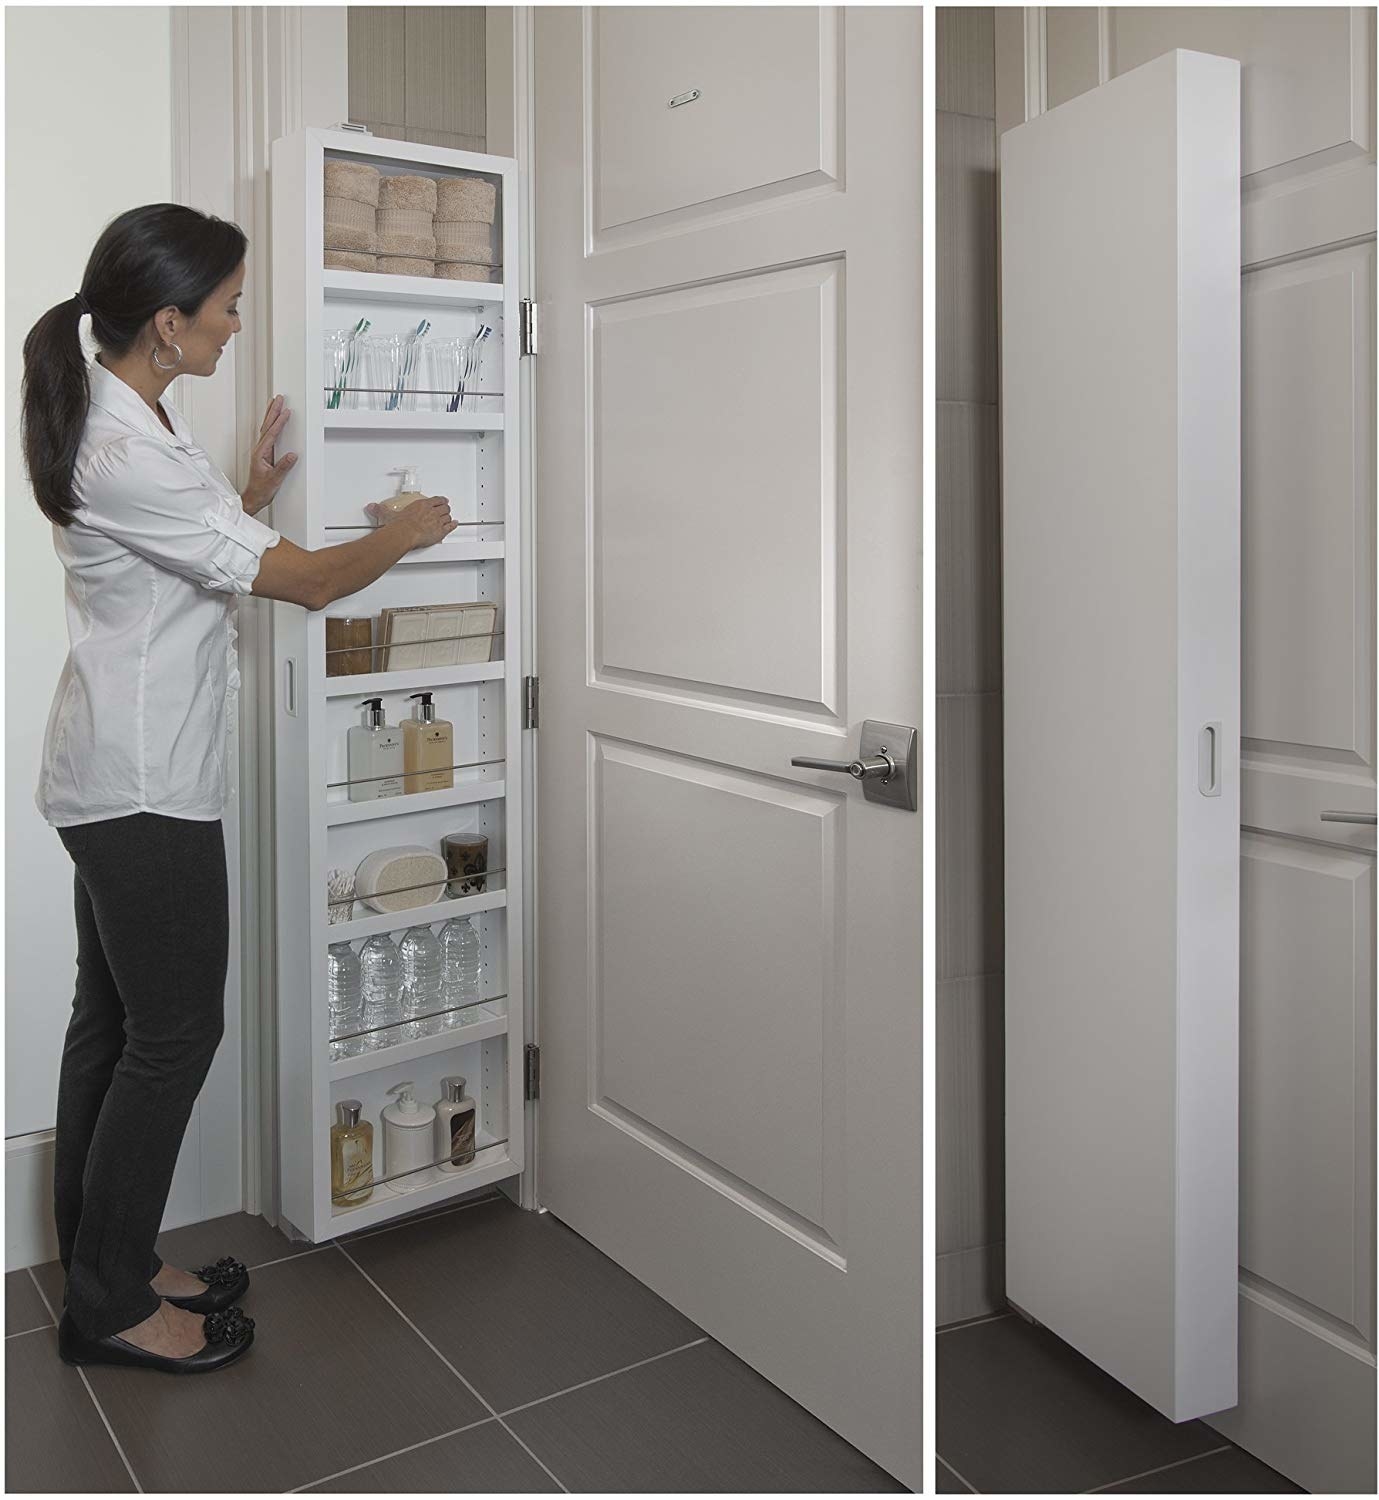 person looking at cabinet filled with bathroom items